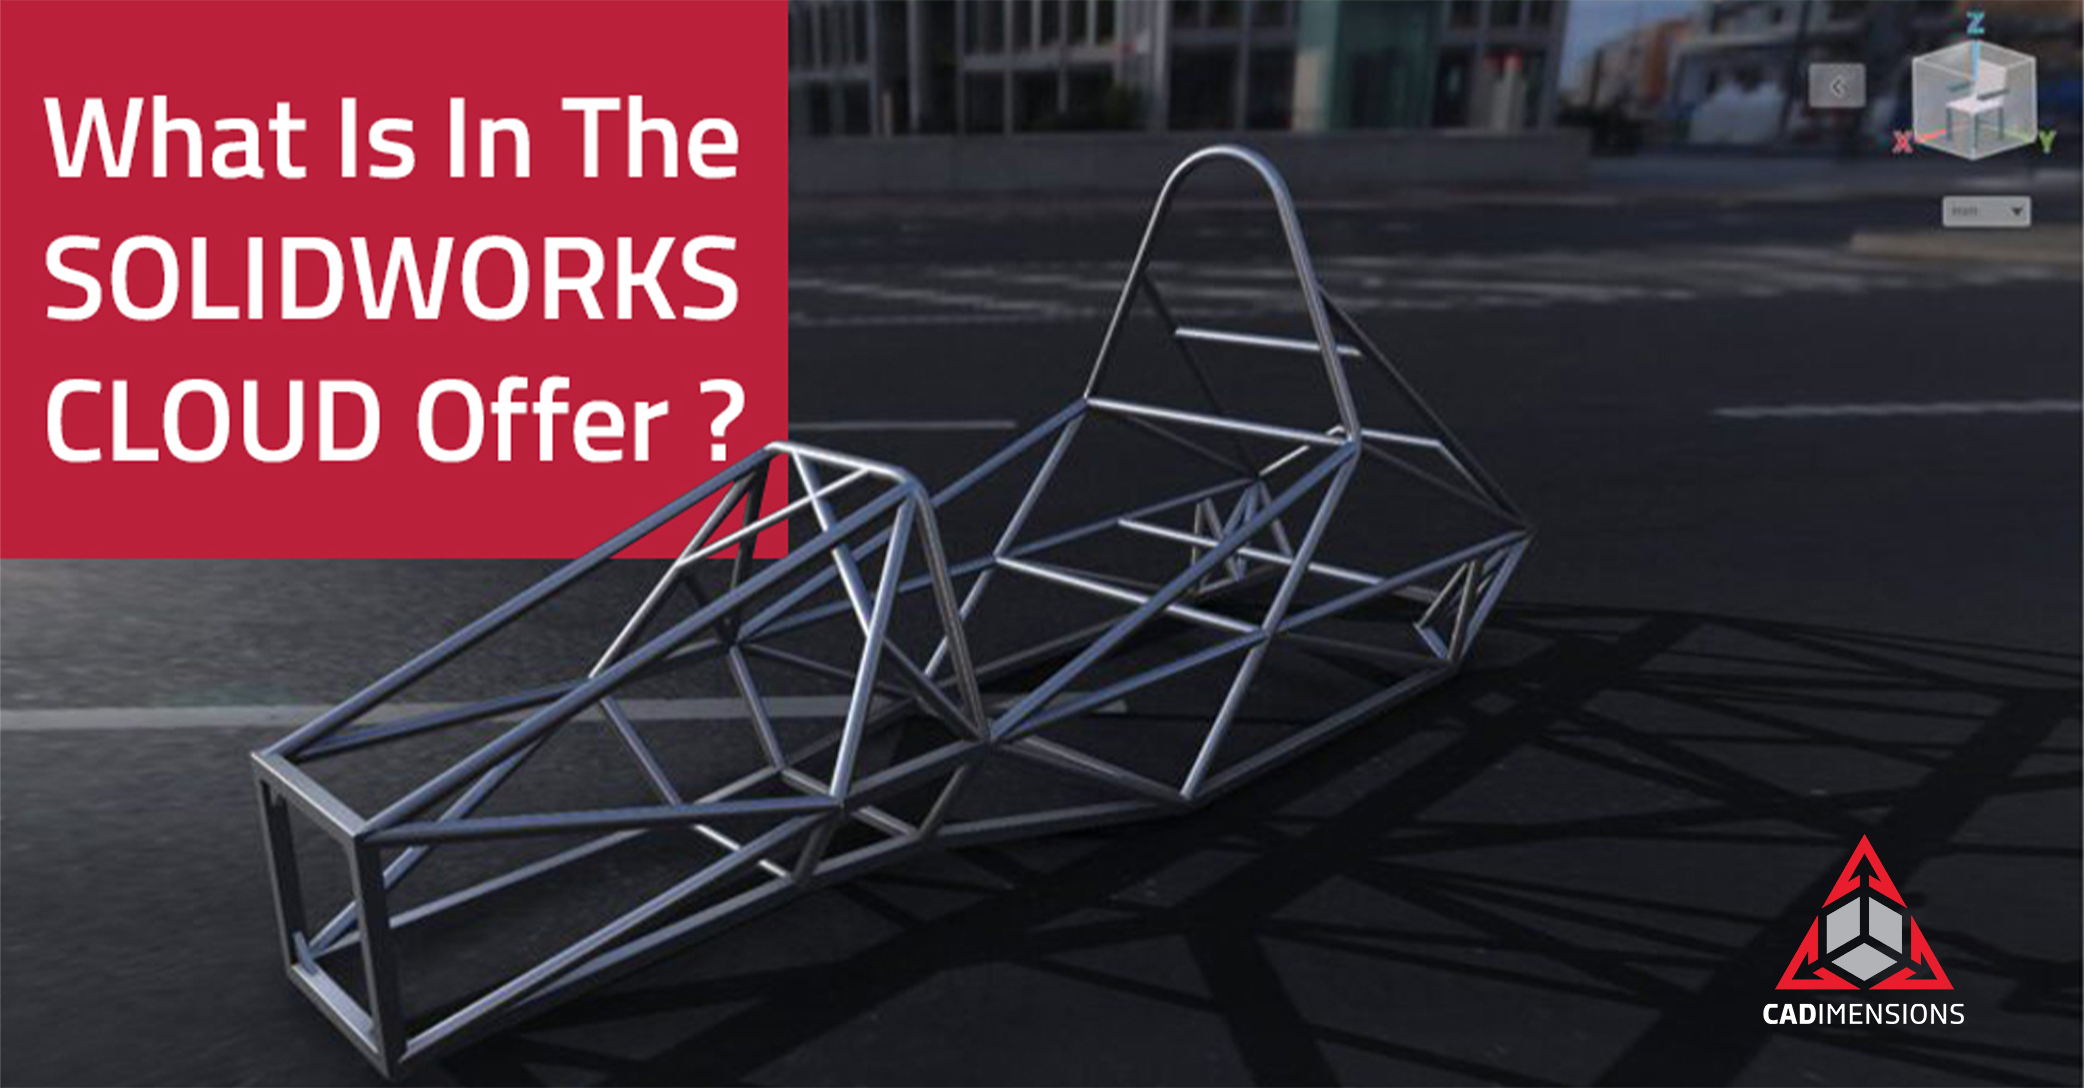 SOLIDWORKS Cloud Offer – Power and Mobility